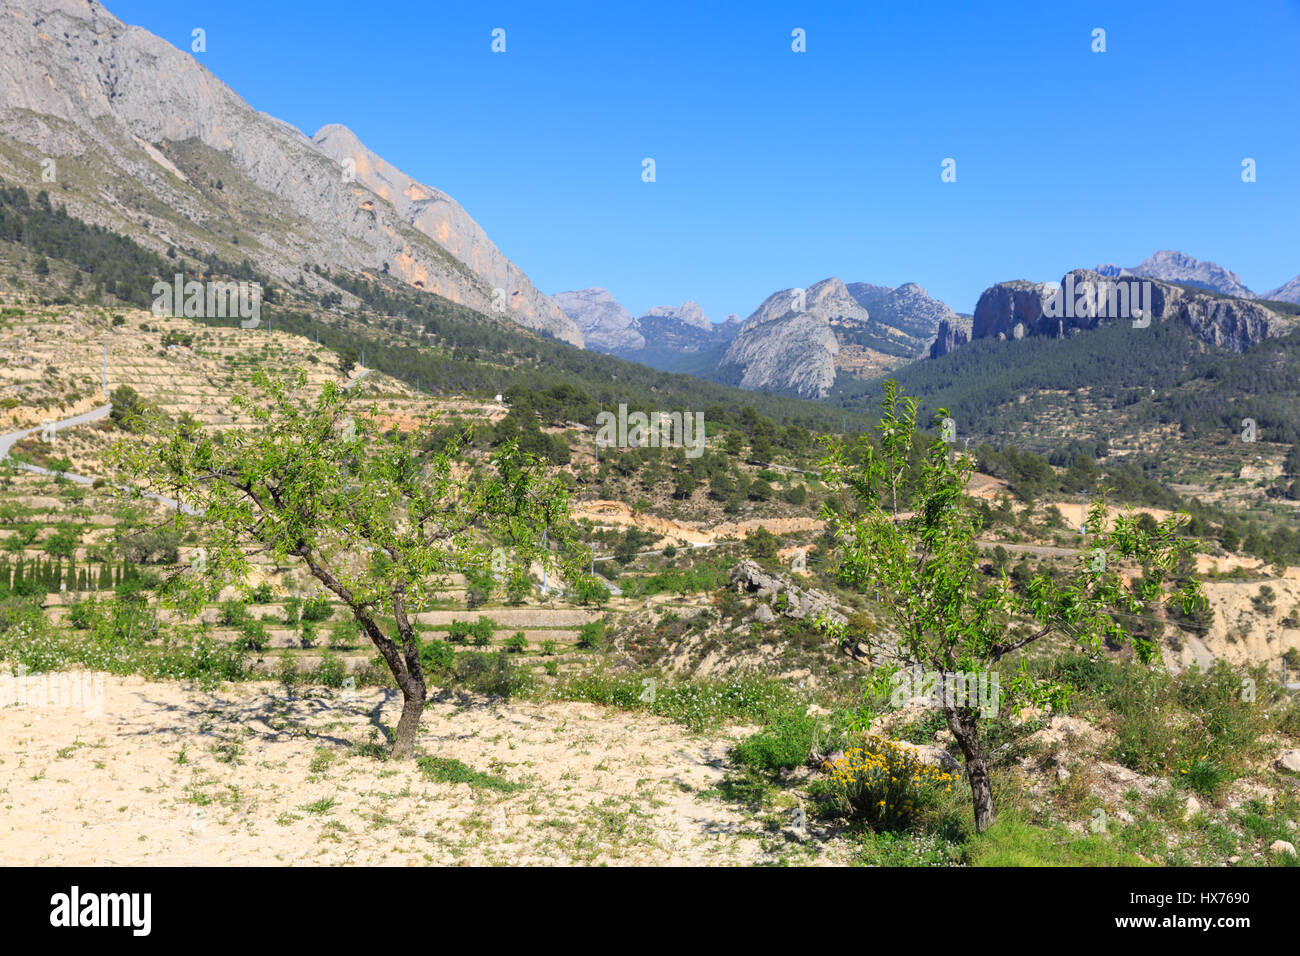 Panoramic view of the mountains near  Sella in the Valencia Region, Spain Stock Photo